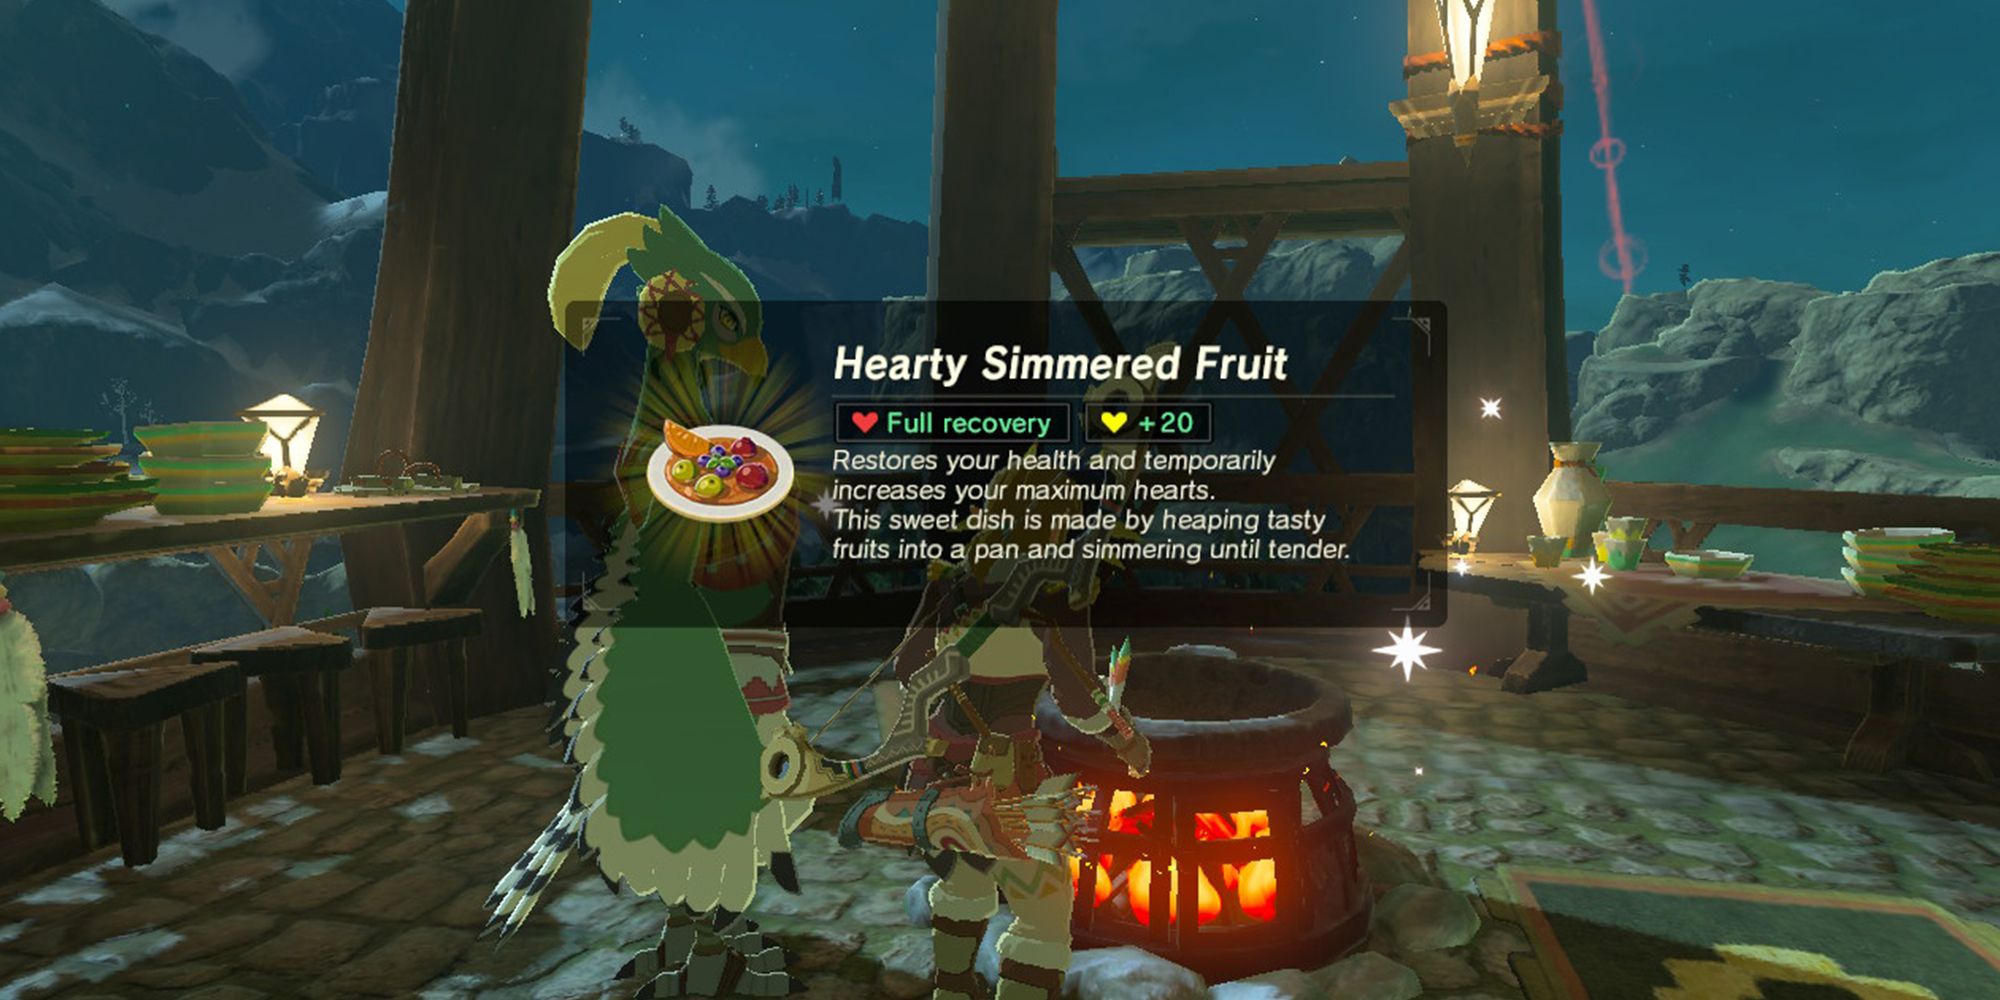 Hearty Simmered Fruit recipe in Breath of the Wild